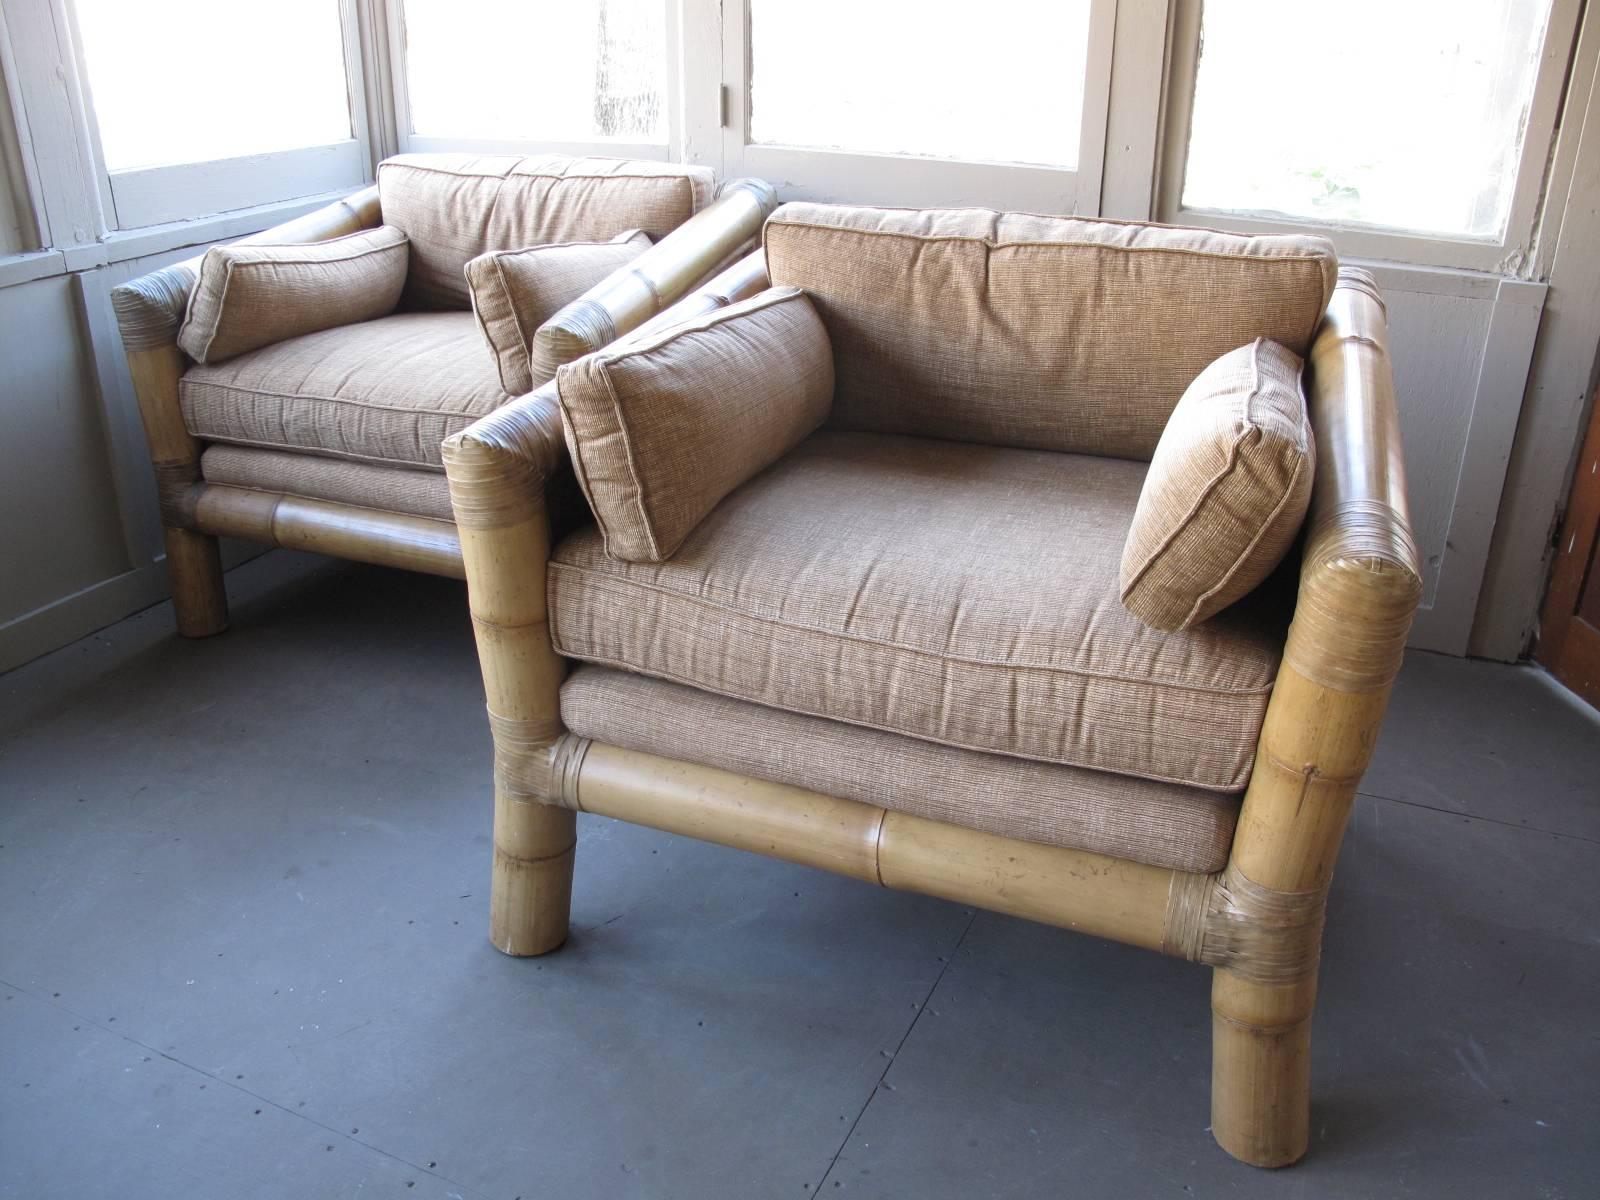 Monumental in scale and proportion. Bamboo frame with cotton blend upholstery.